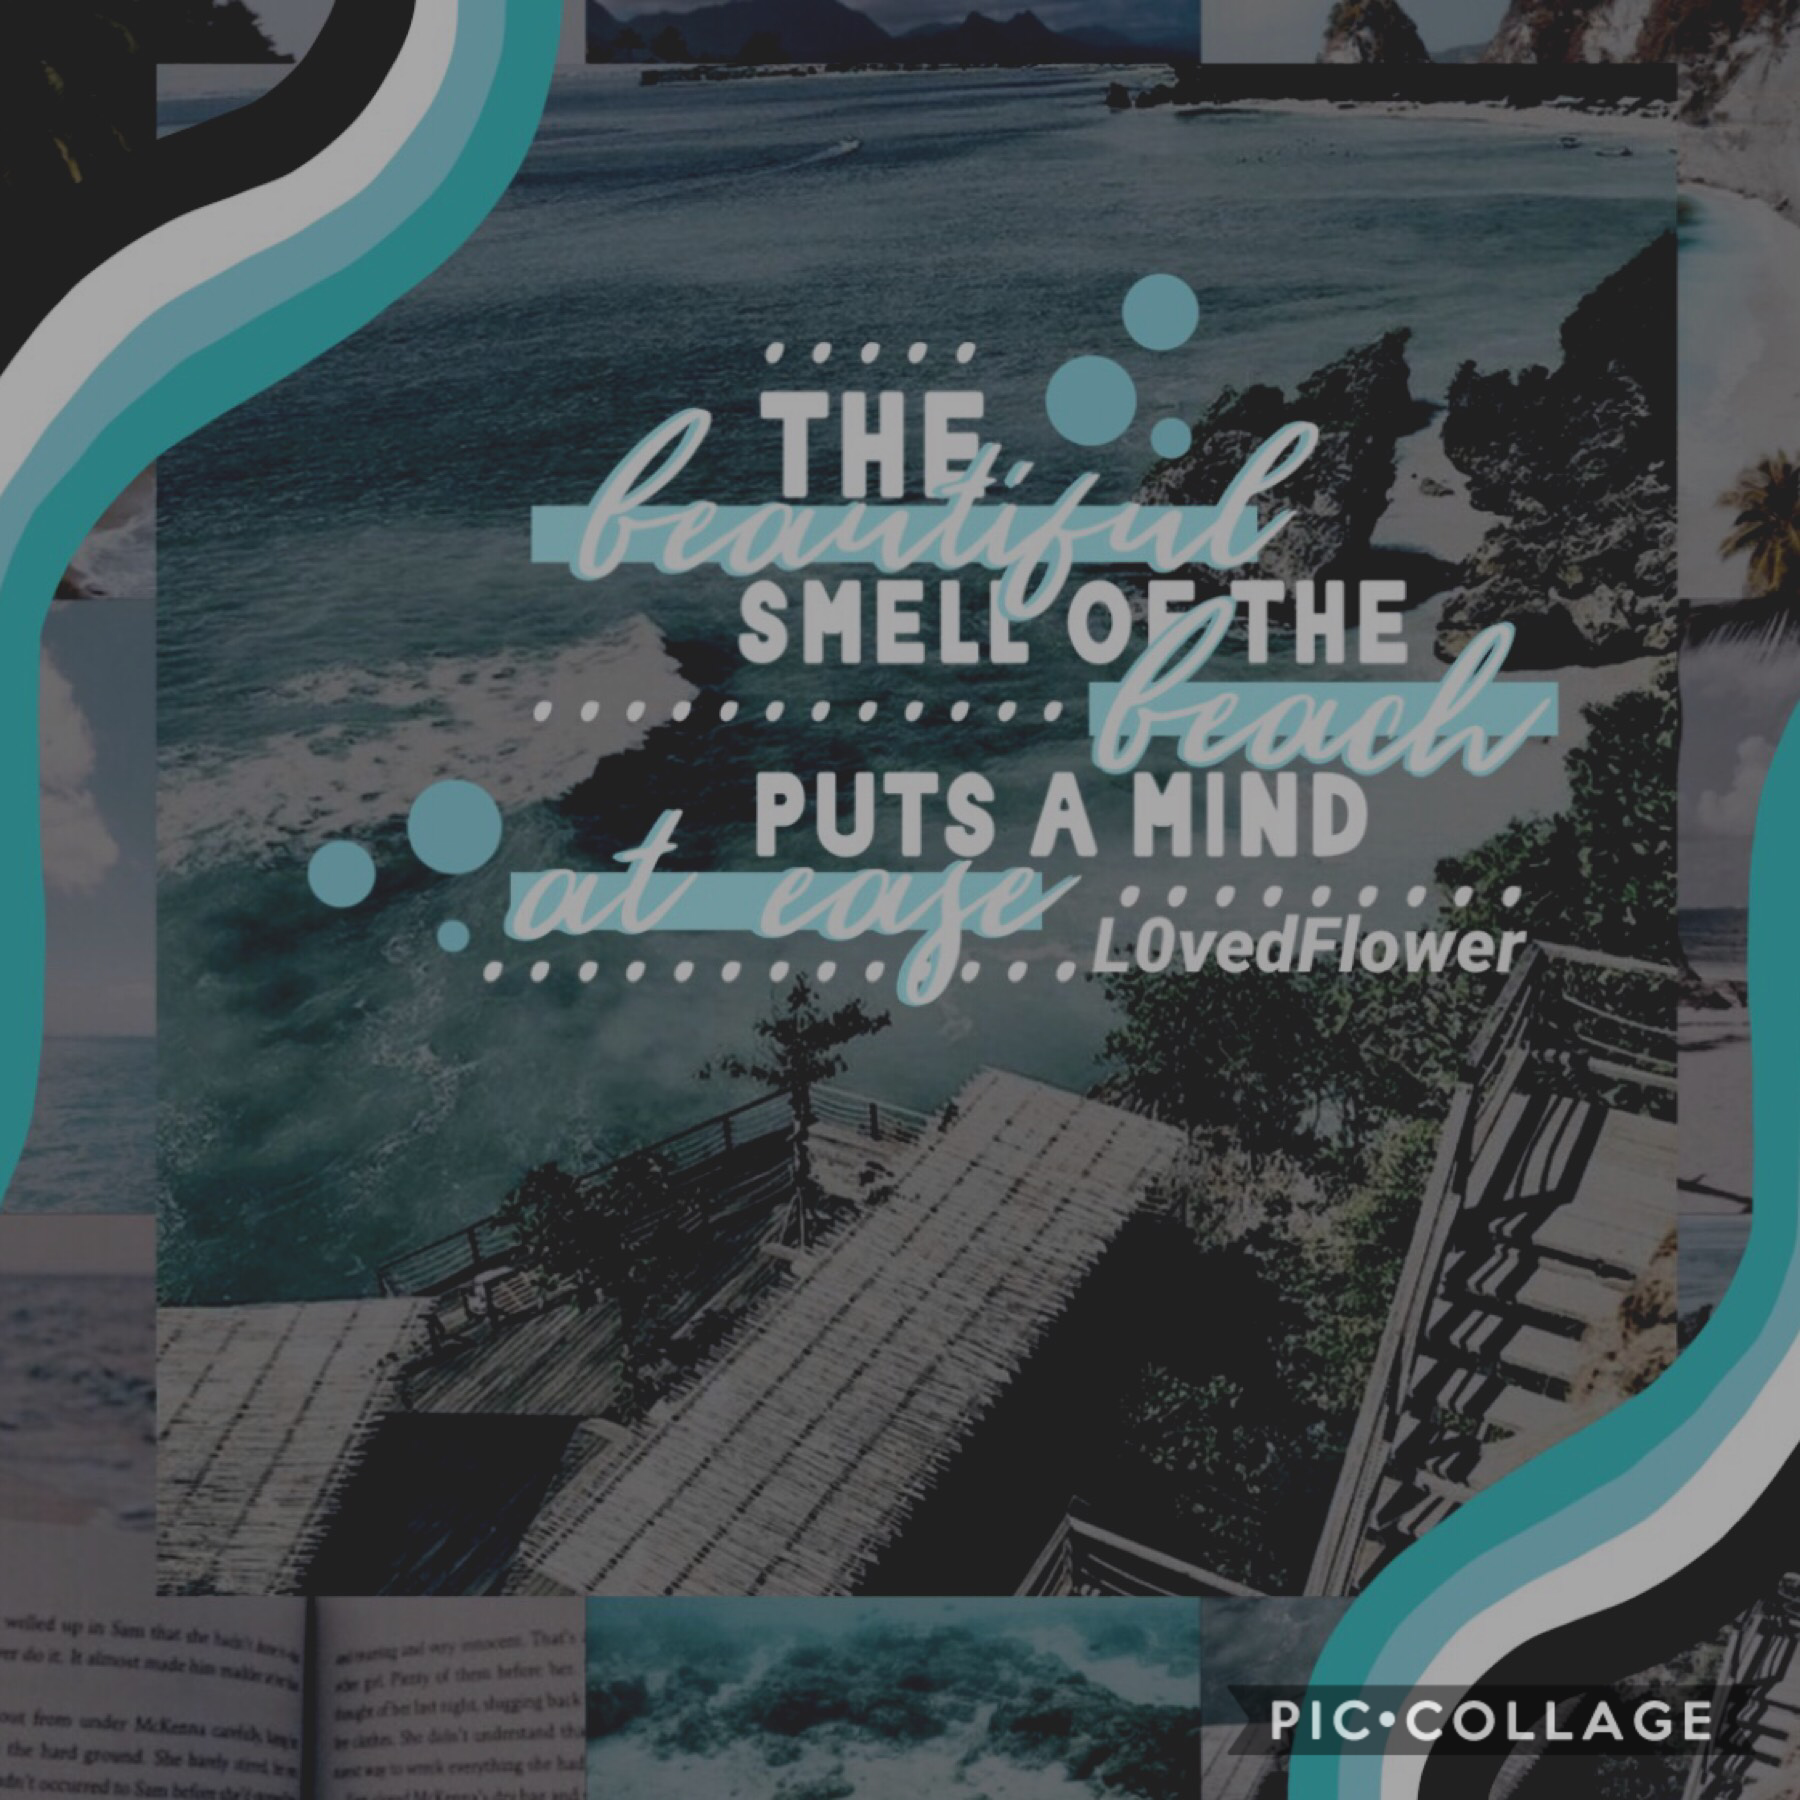 [click]
Entry to a games.
I had to change the quote to my own words and so I have :))
My theme was ___beach___
hope y’all like this